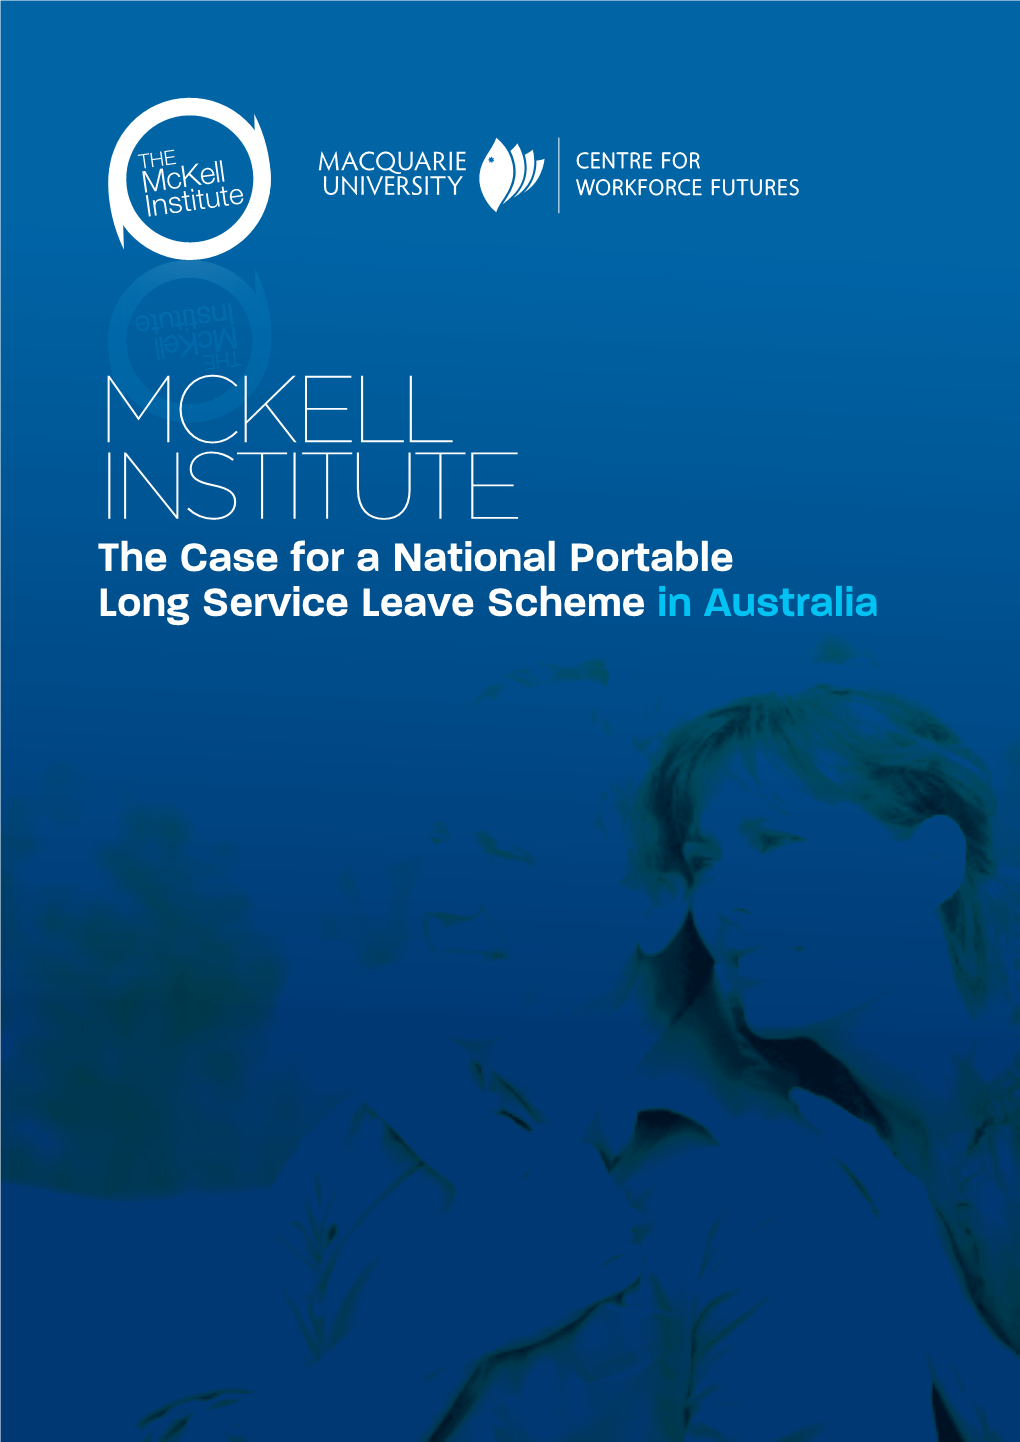 The Case for a National Portable Long Service Leave Scheme in Australia About1